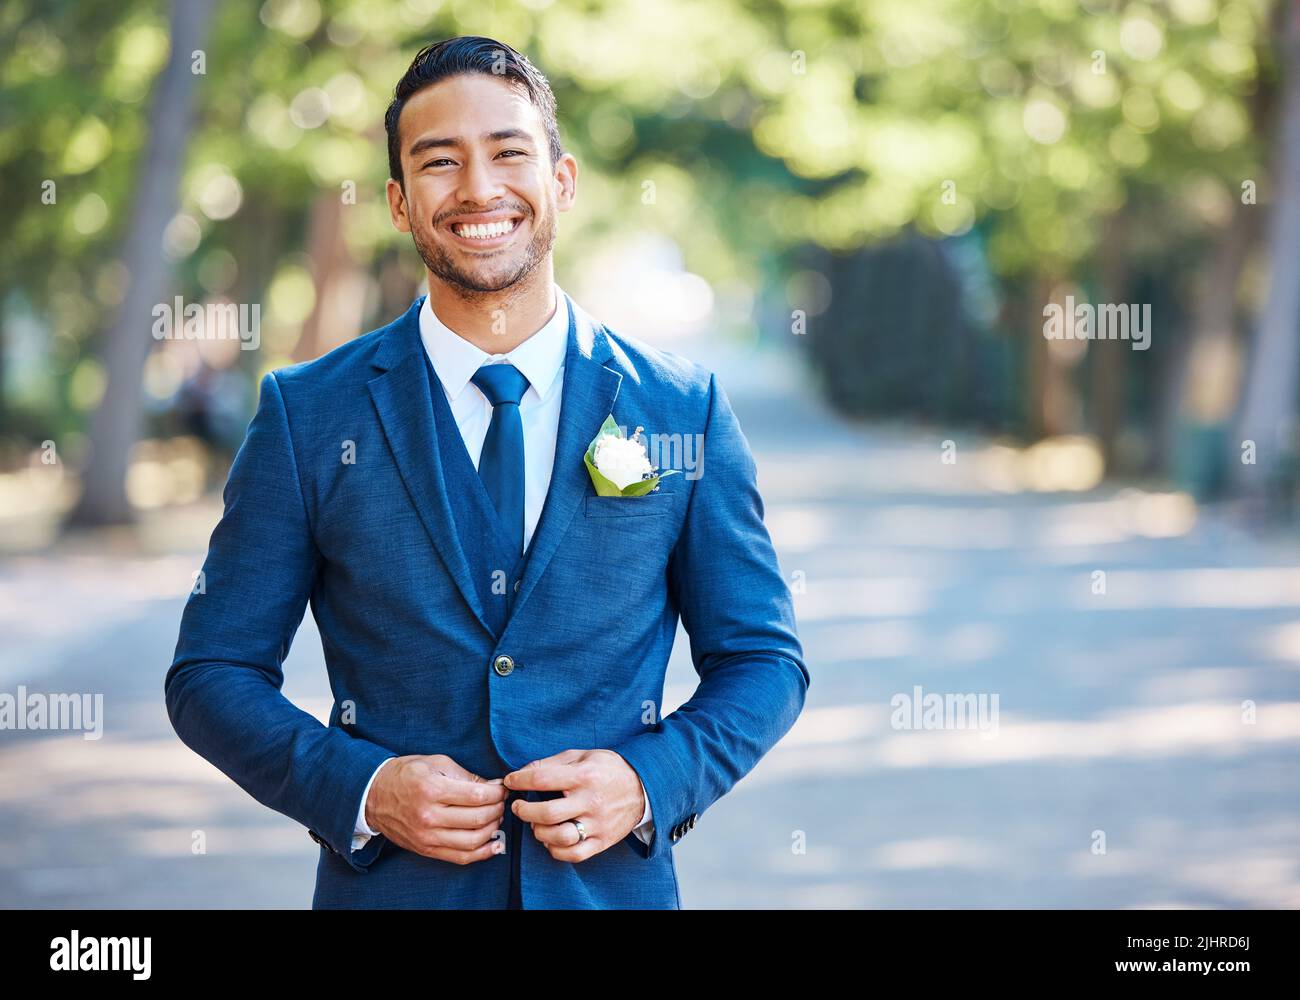 Close up of modern man accessories. Cherry bow tie, blue leather shoest and  red wedding bouquet on a carpet Stock Photo - Alamy